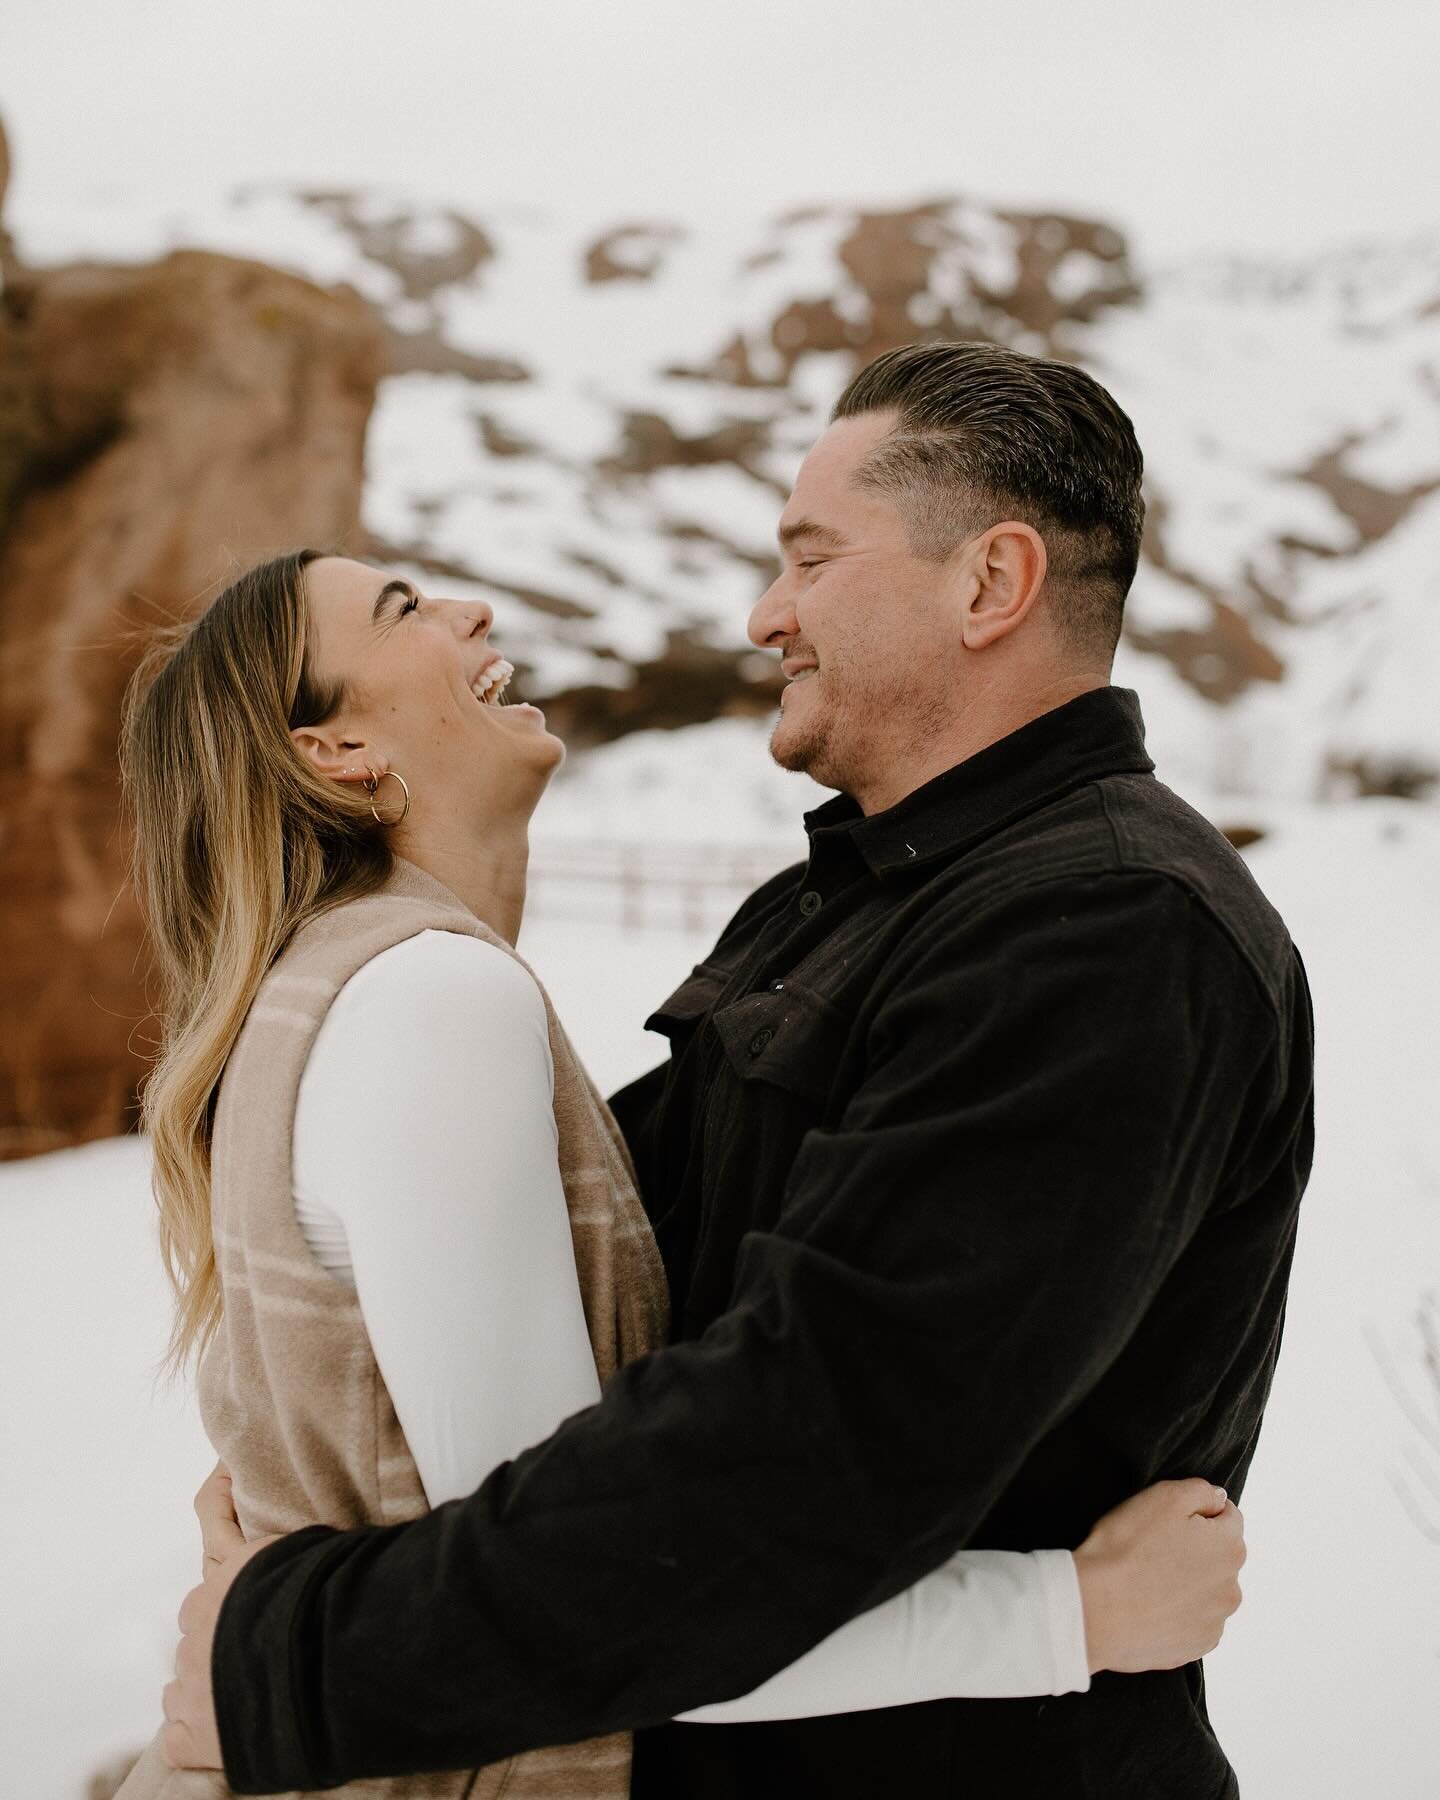 Finally coming out of social media hibernation to share this stunning batch of sneak peeks. These two braved the snow during their visit from California after a huge blizzard. I can&rsquo;t wait to do this all again at their wedding in July&hellip; h